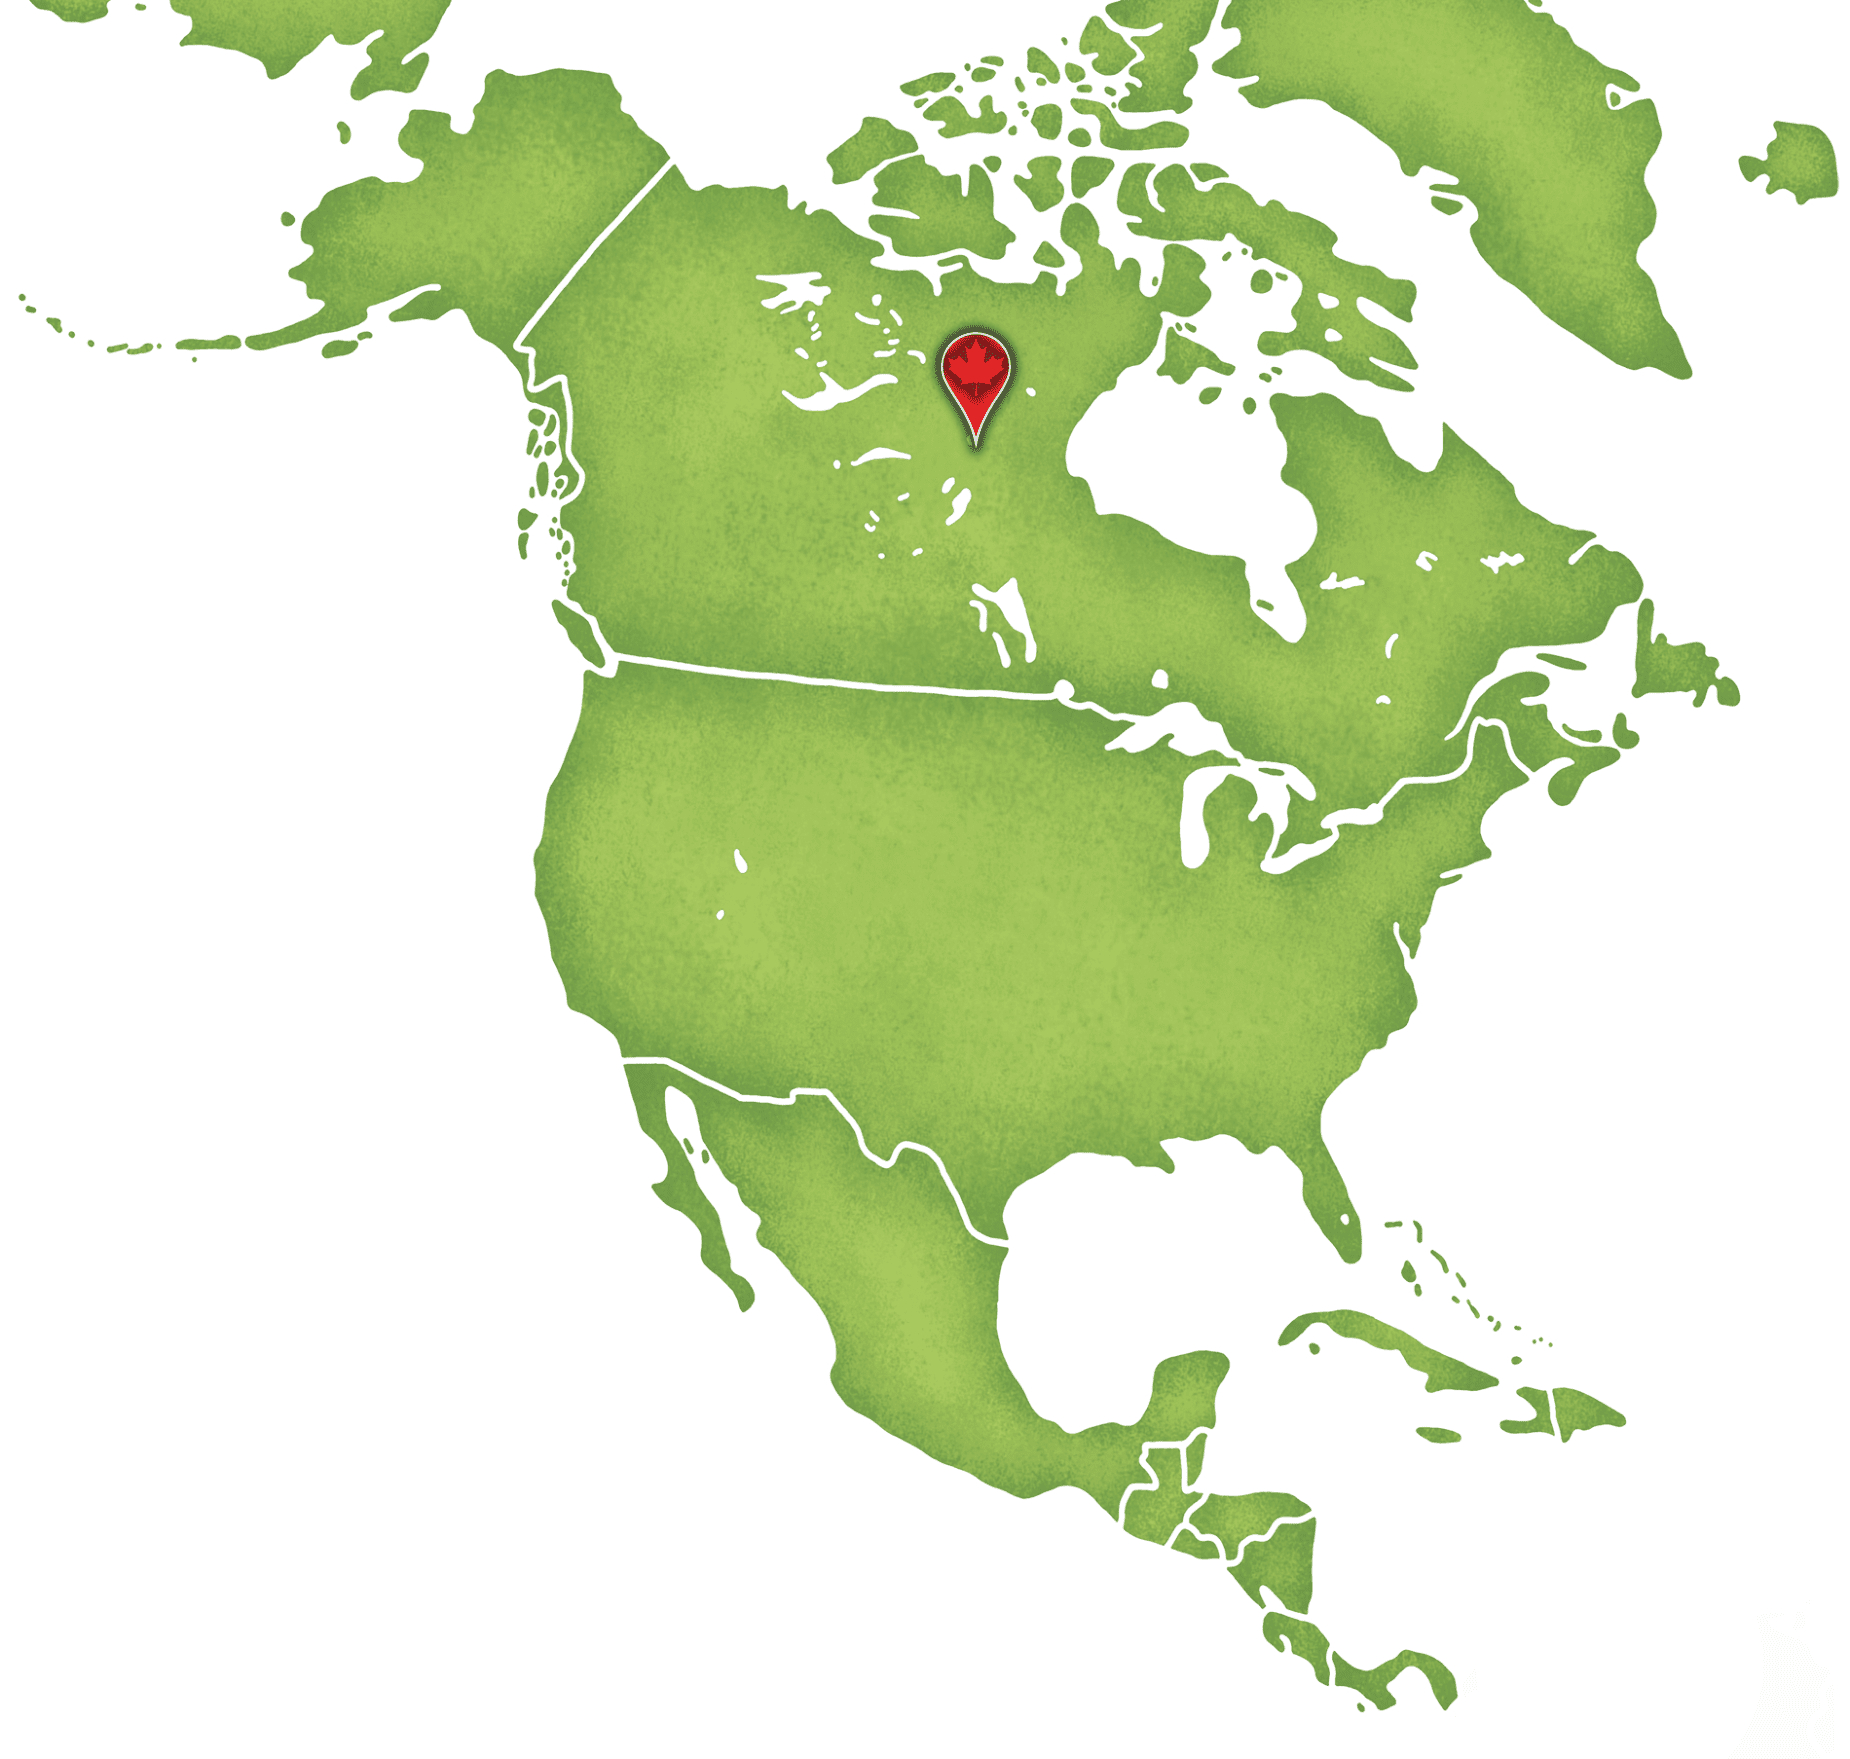 Green map of North American with a pin pointing to where Gangler's in Manitoba is located